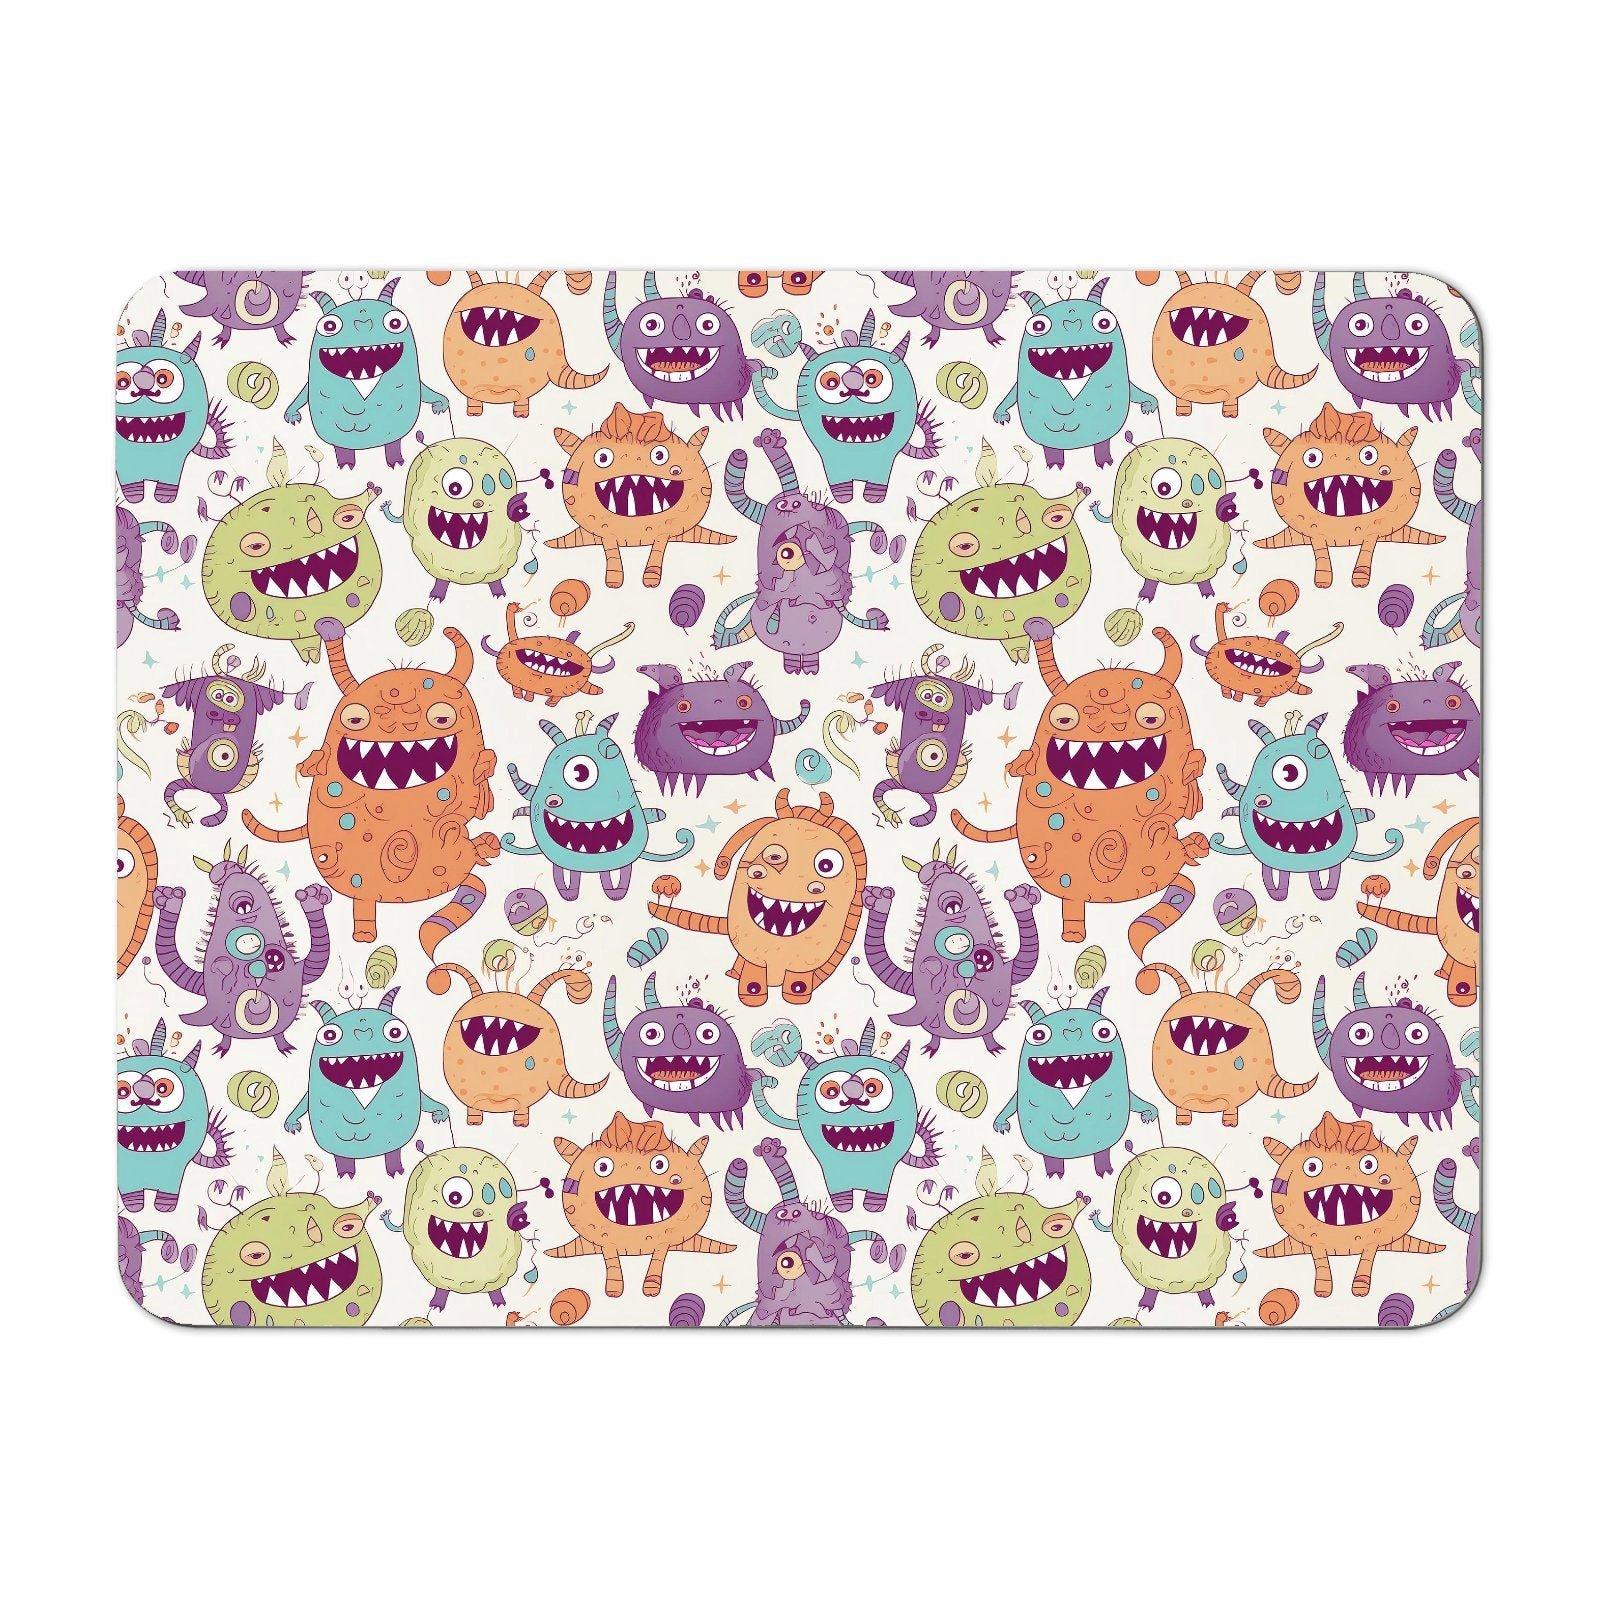 Playful Halloween Monsters Placemats